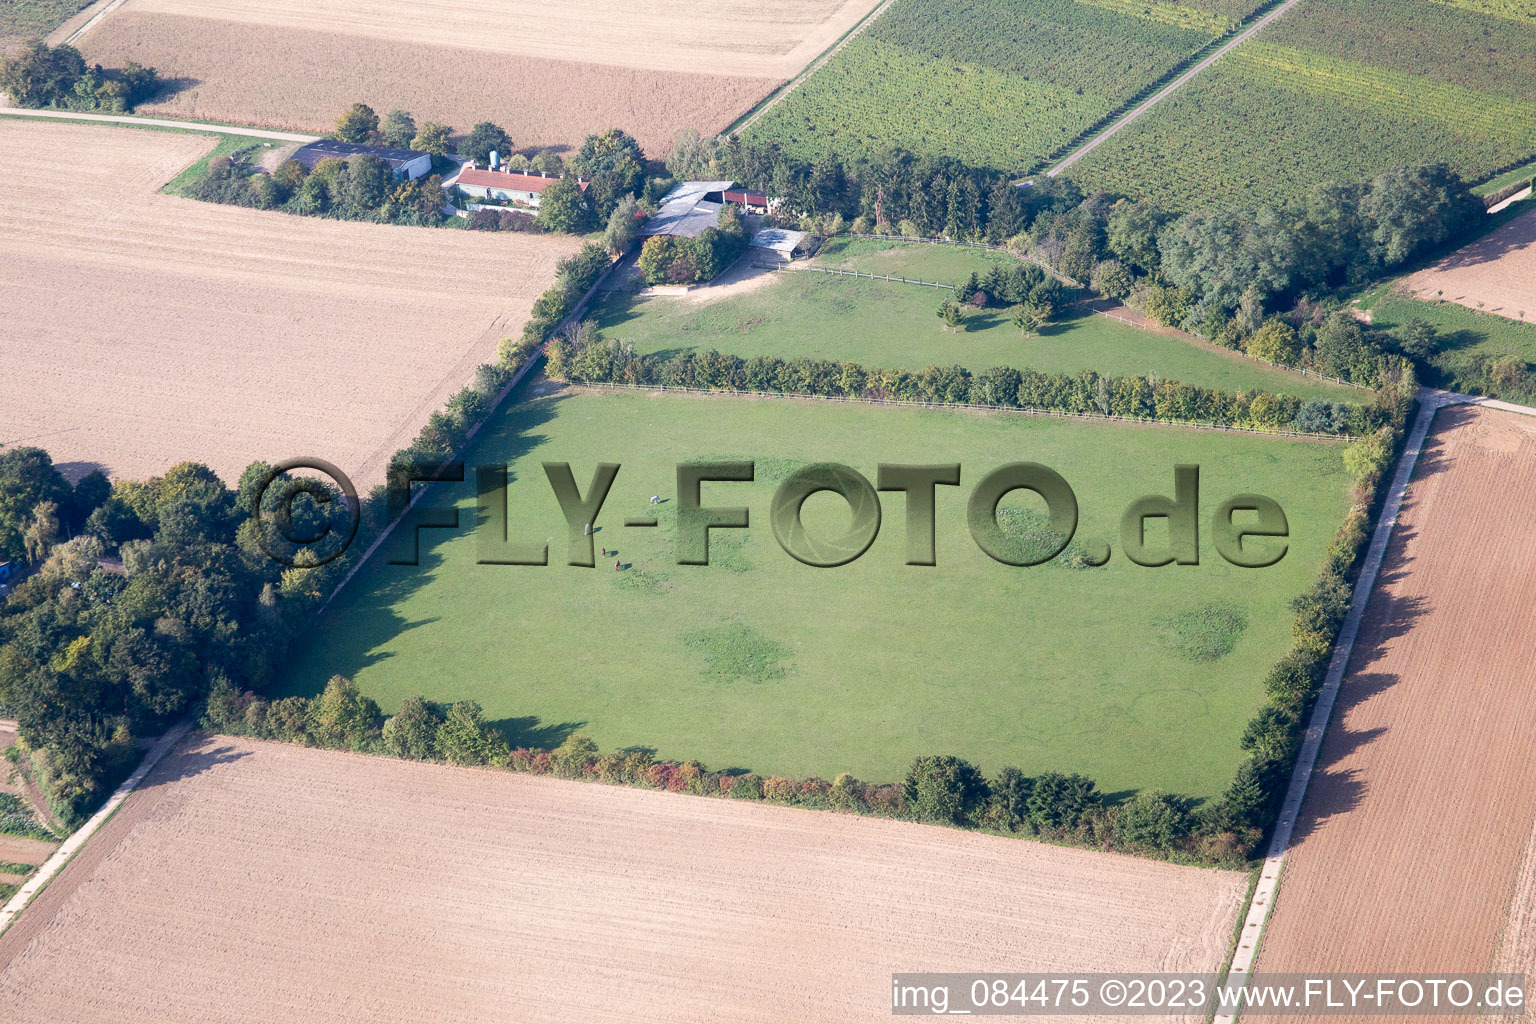 Galgenberg in Minfeld in the state Rhineland-Palatinate, Germany seen from above